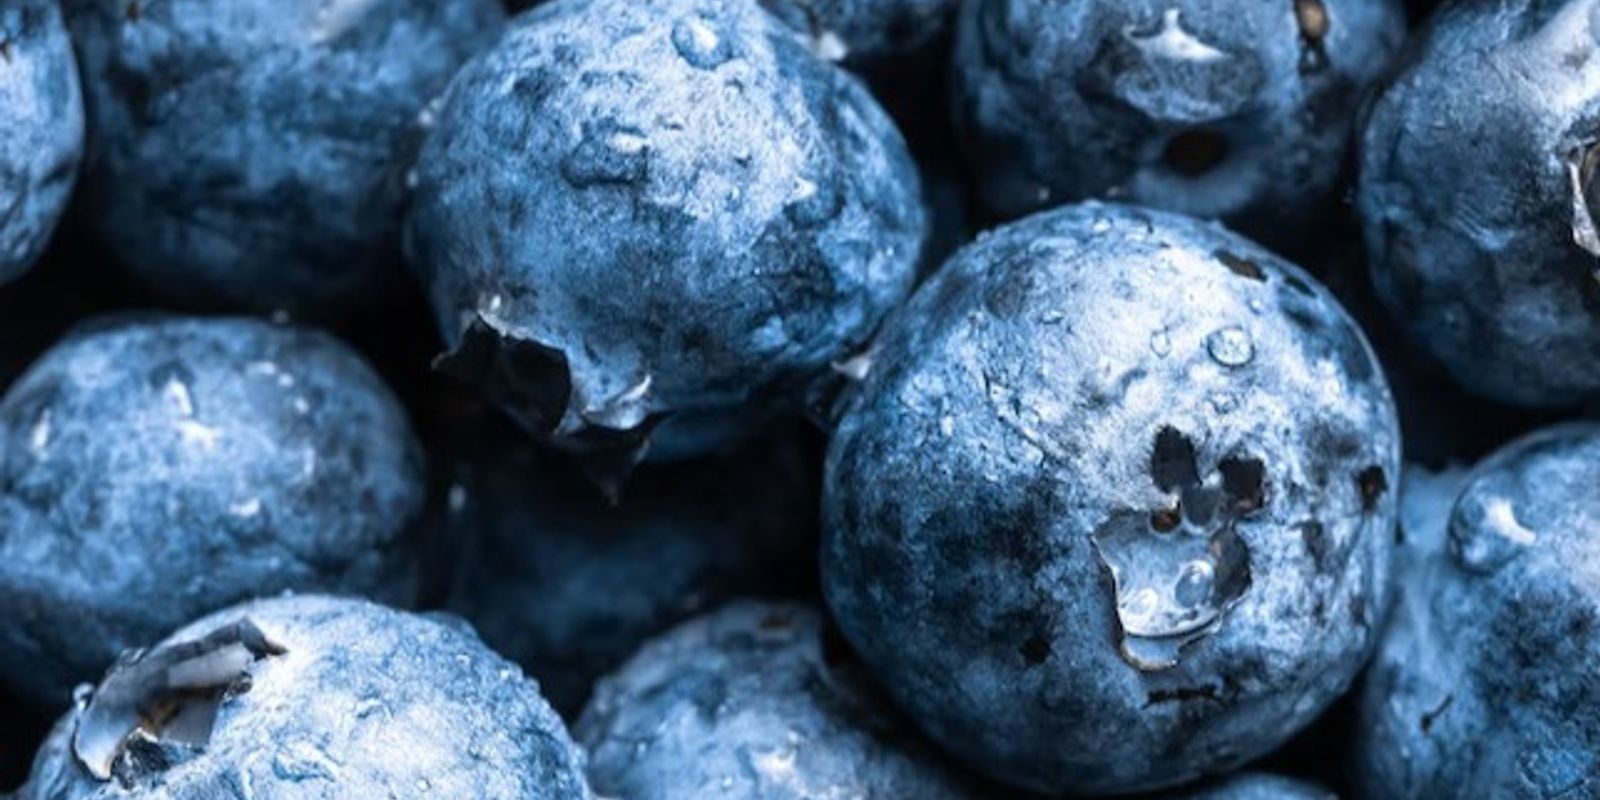 South Africa Fresh Blueberry market overview 2023